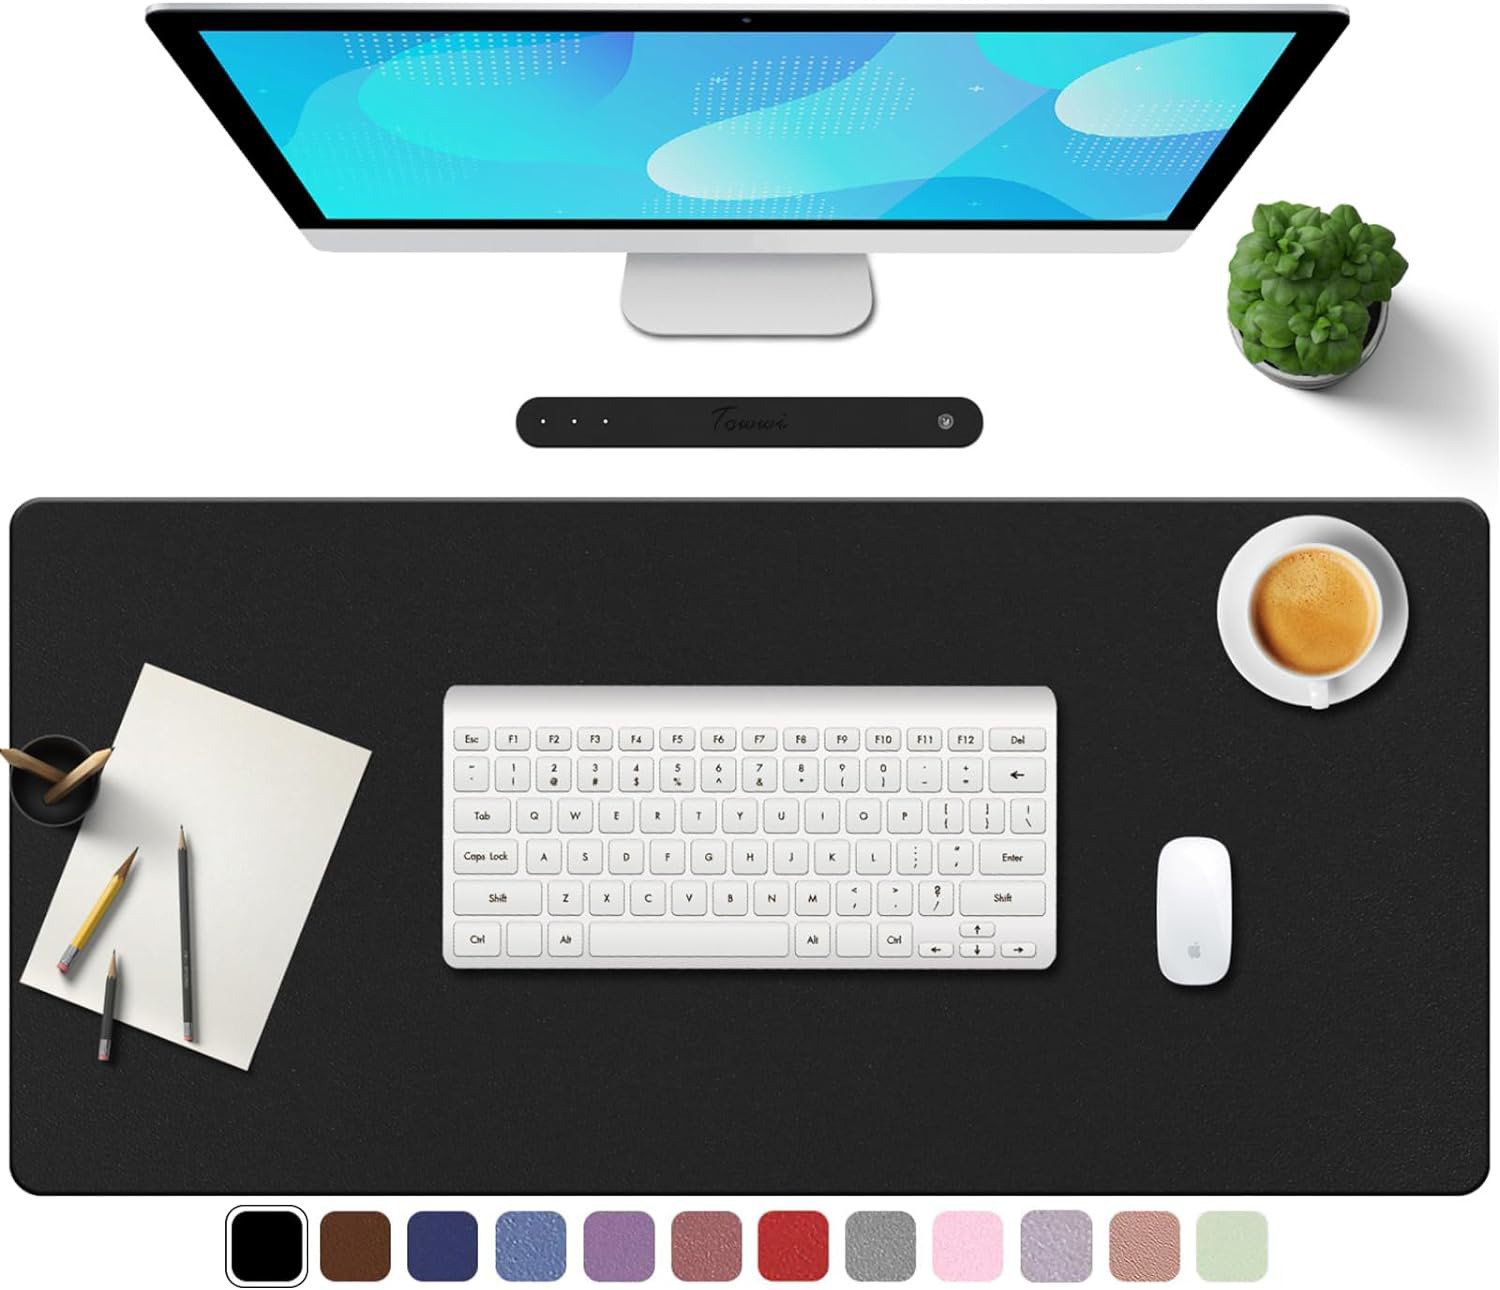 TOWWI PU Leather Desk Pad with Suede Base, Multi-Color Non-Slip Mouse Pad, 36”